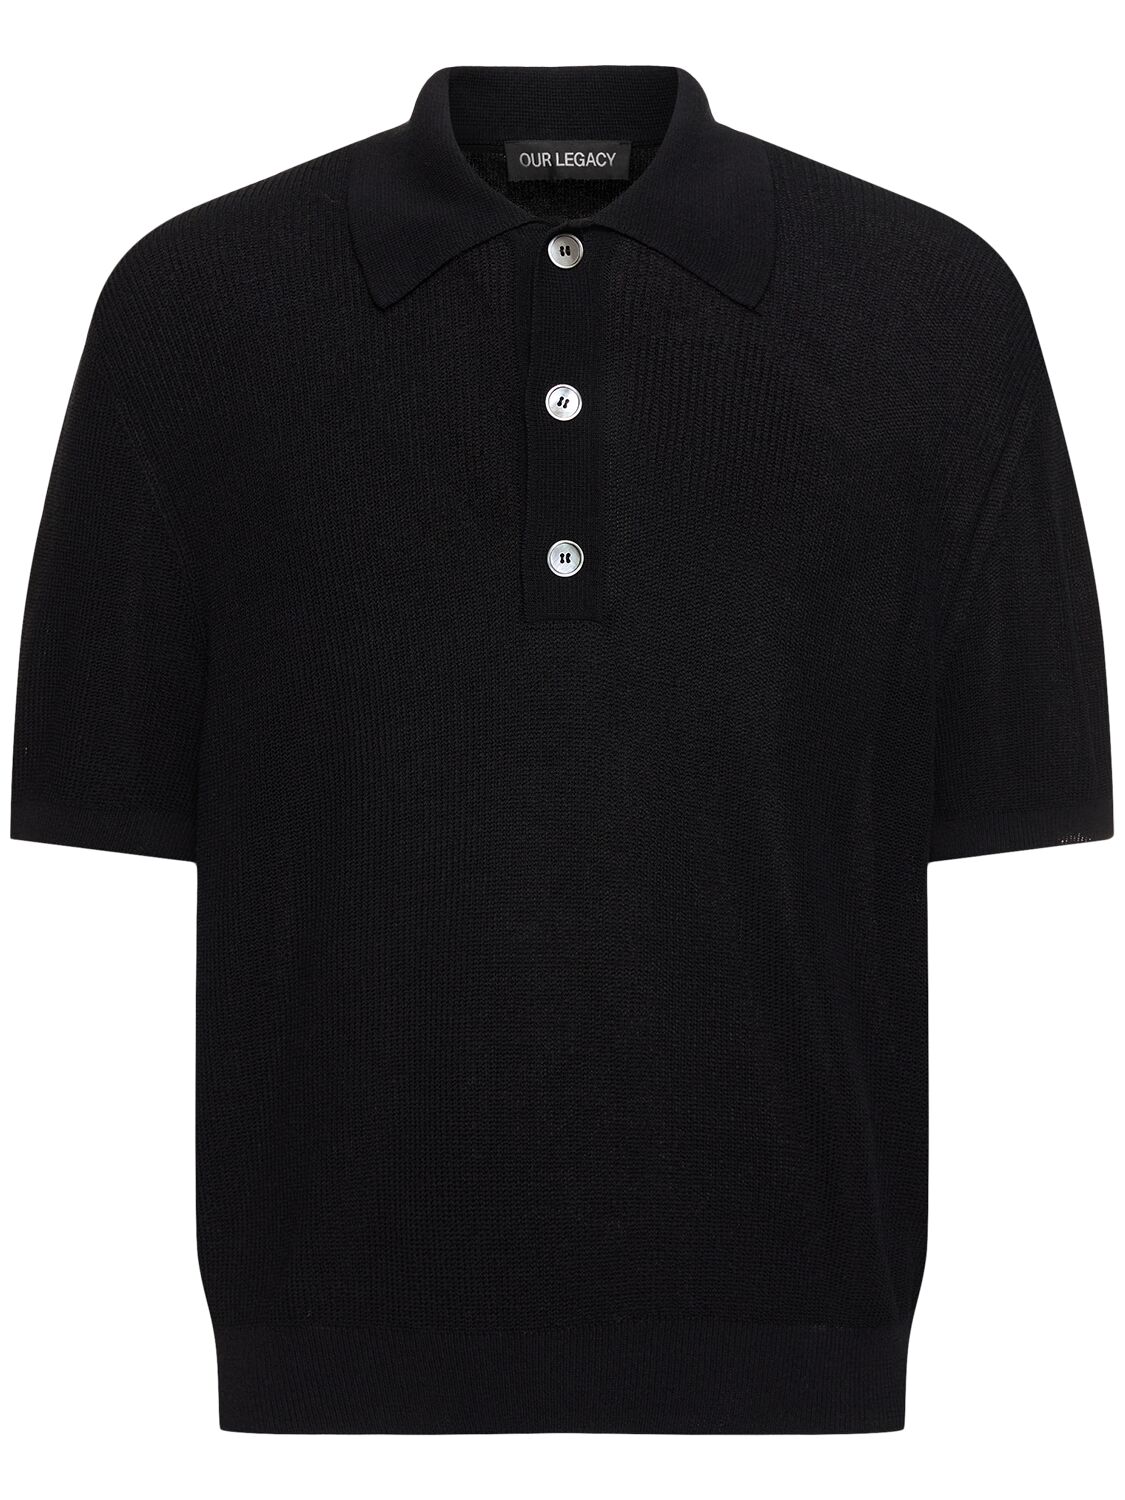 Our Legacy Crispy Cotton Blend Knit S/s Polo In Black